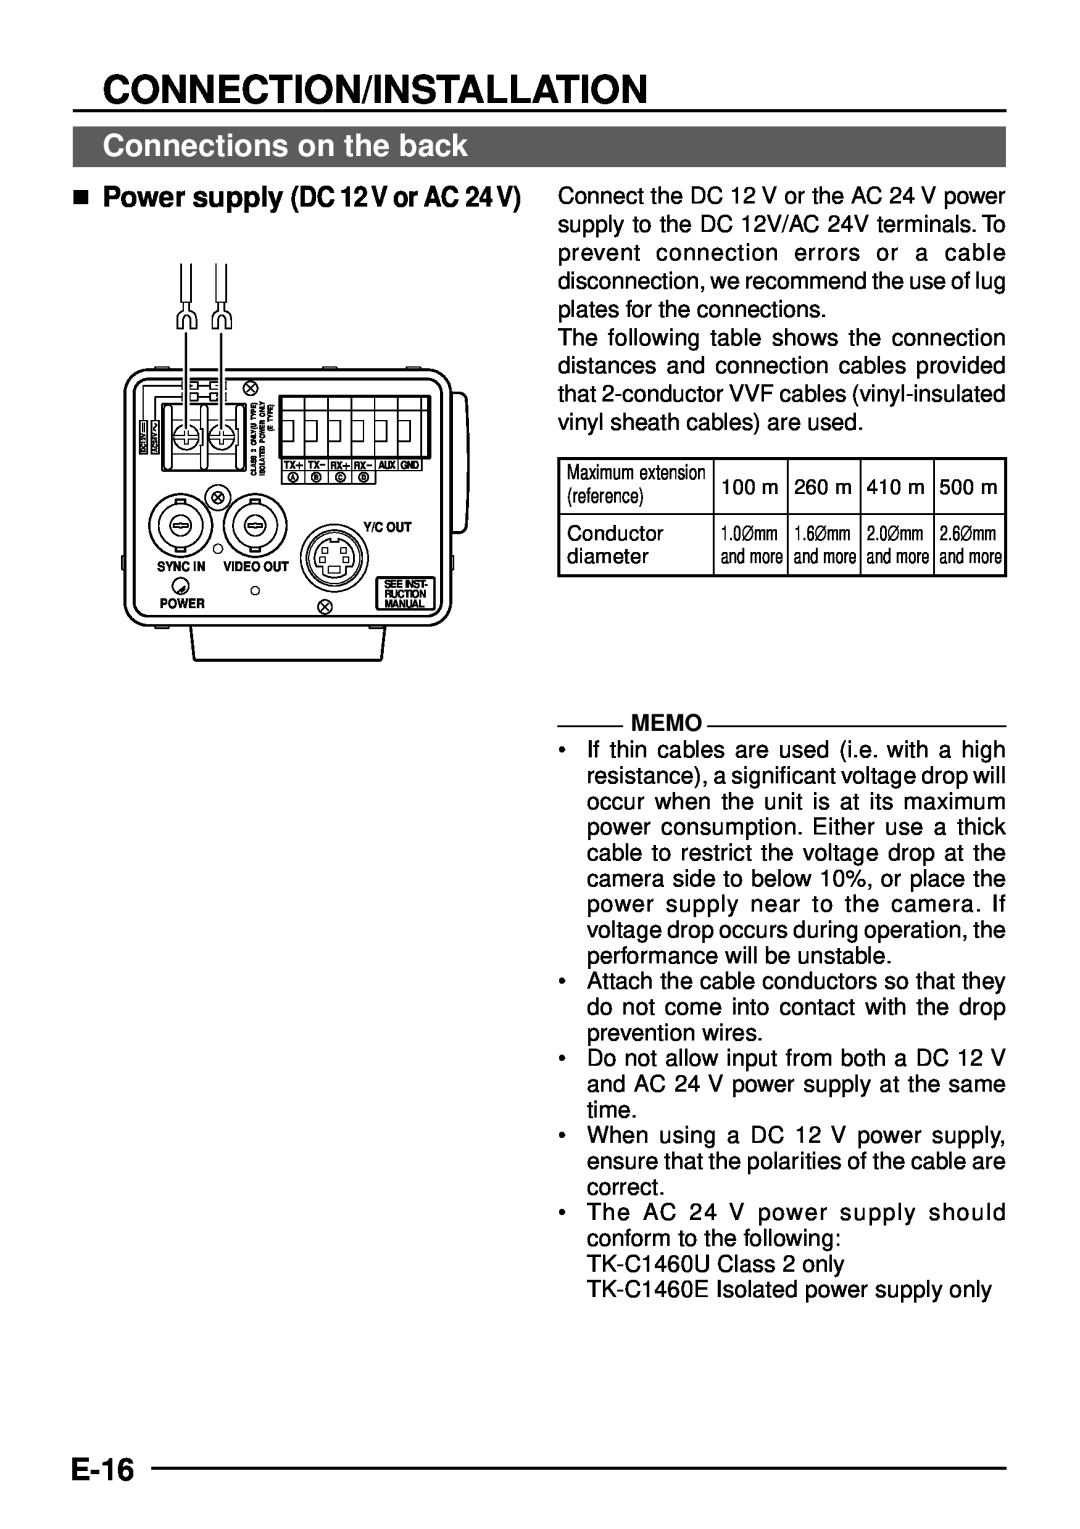 JVC TK-C1460 manual Connections on the back, E-16,  Power supply DC 12 V or AC 24, Connection/Installation, Memo 